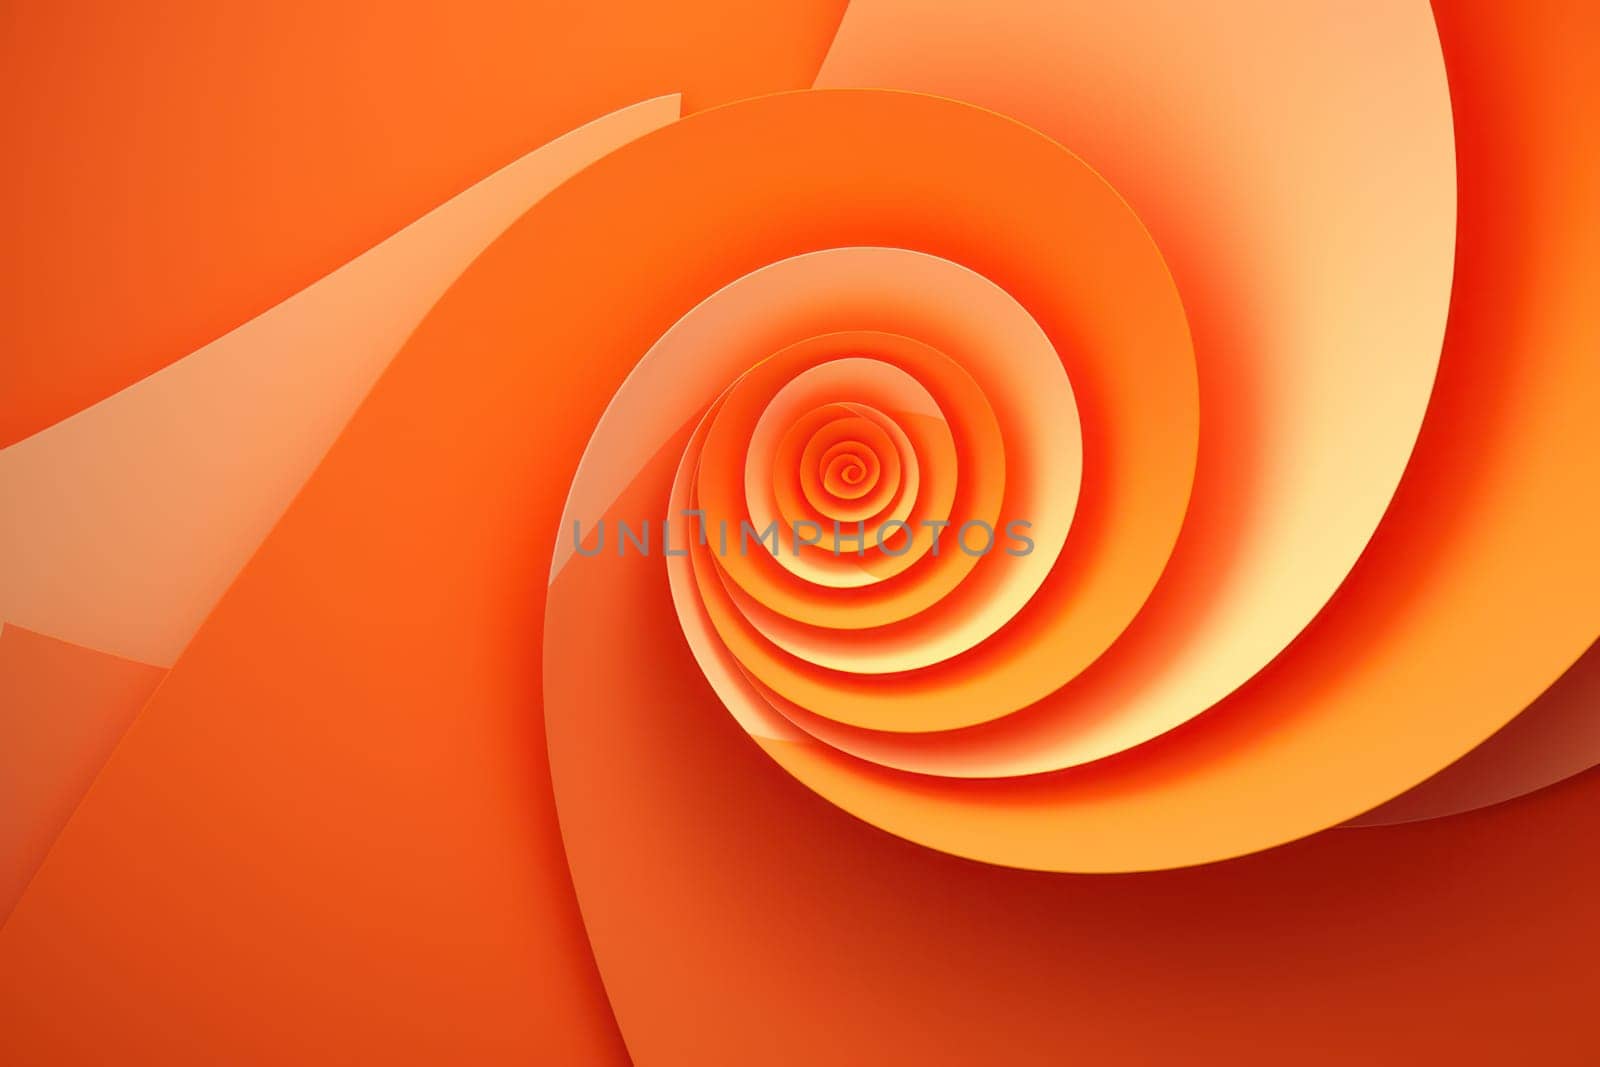 Swirling Abstract Pattern: Futuristic Curves and Circular Motion in a Vibrant Red and Orange Gradient by Vichizh